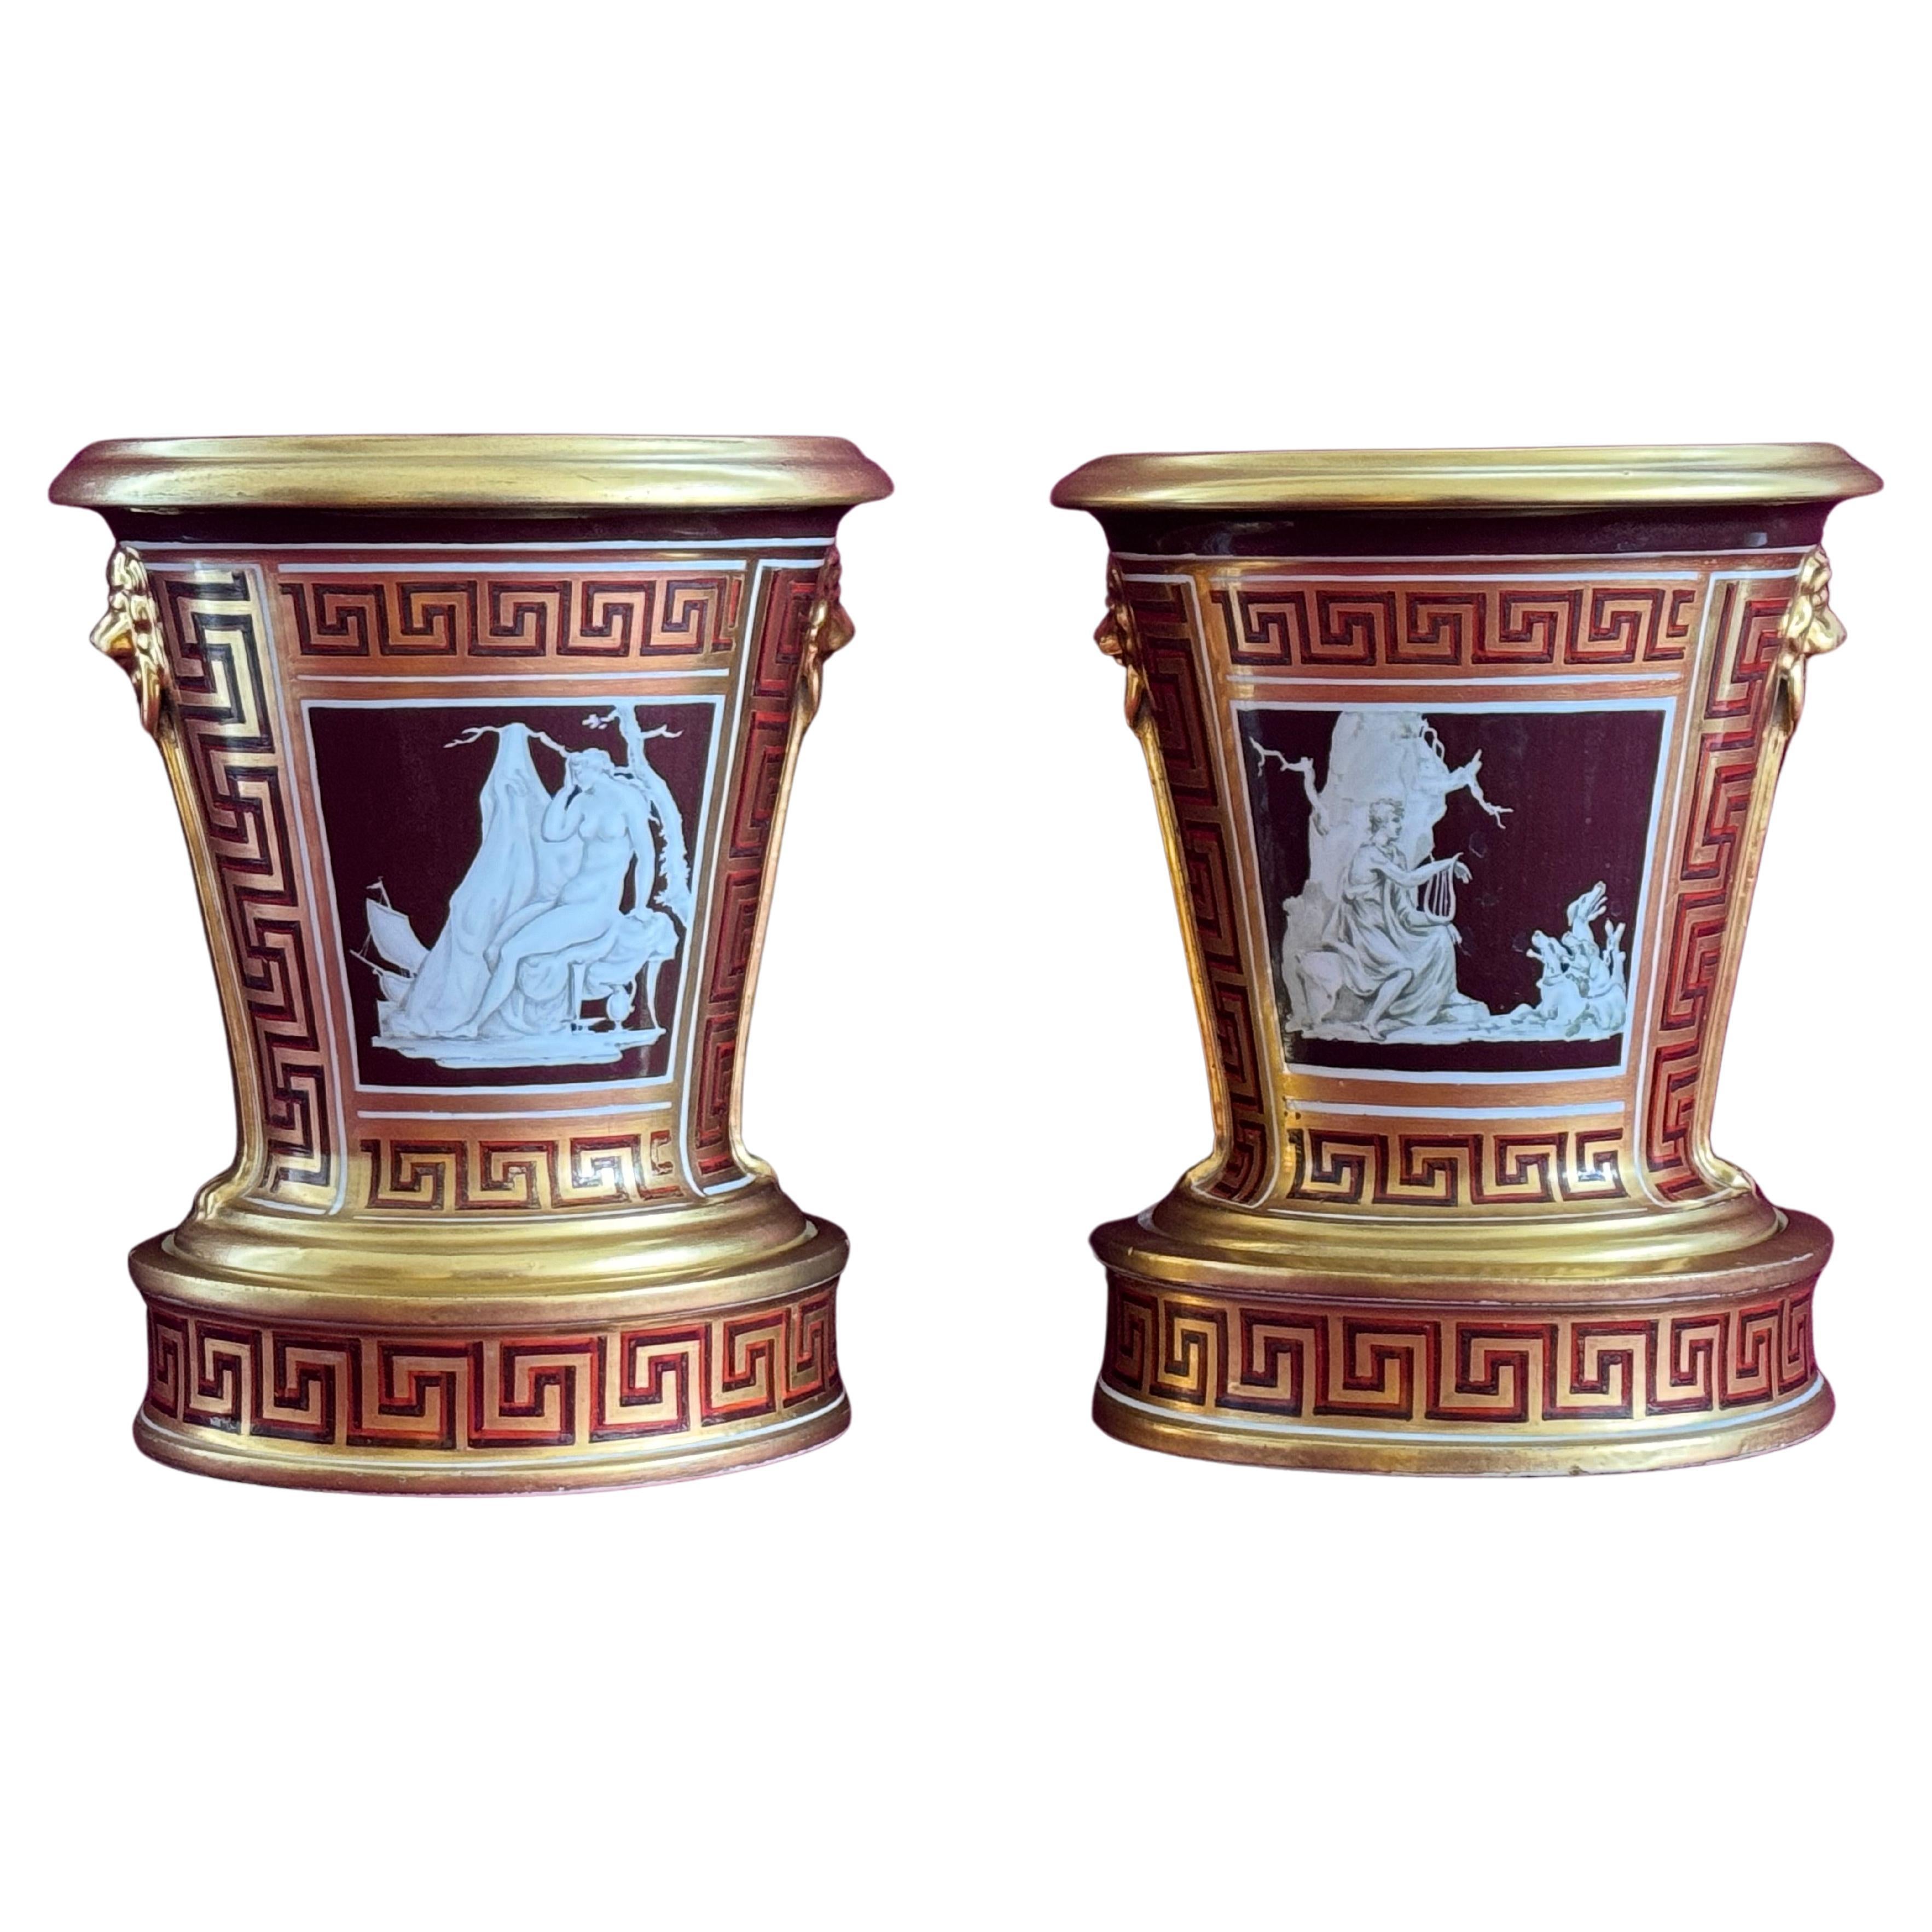 A pair of Coalport Cache Pots decorated by Thomas Baxter c.1802 - 1805